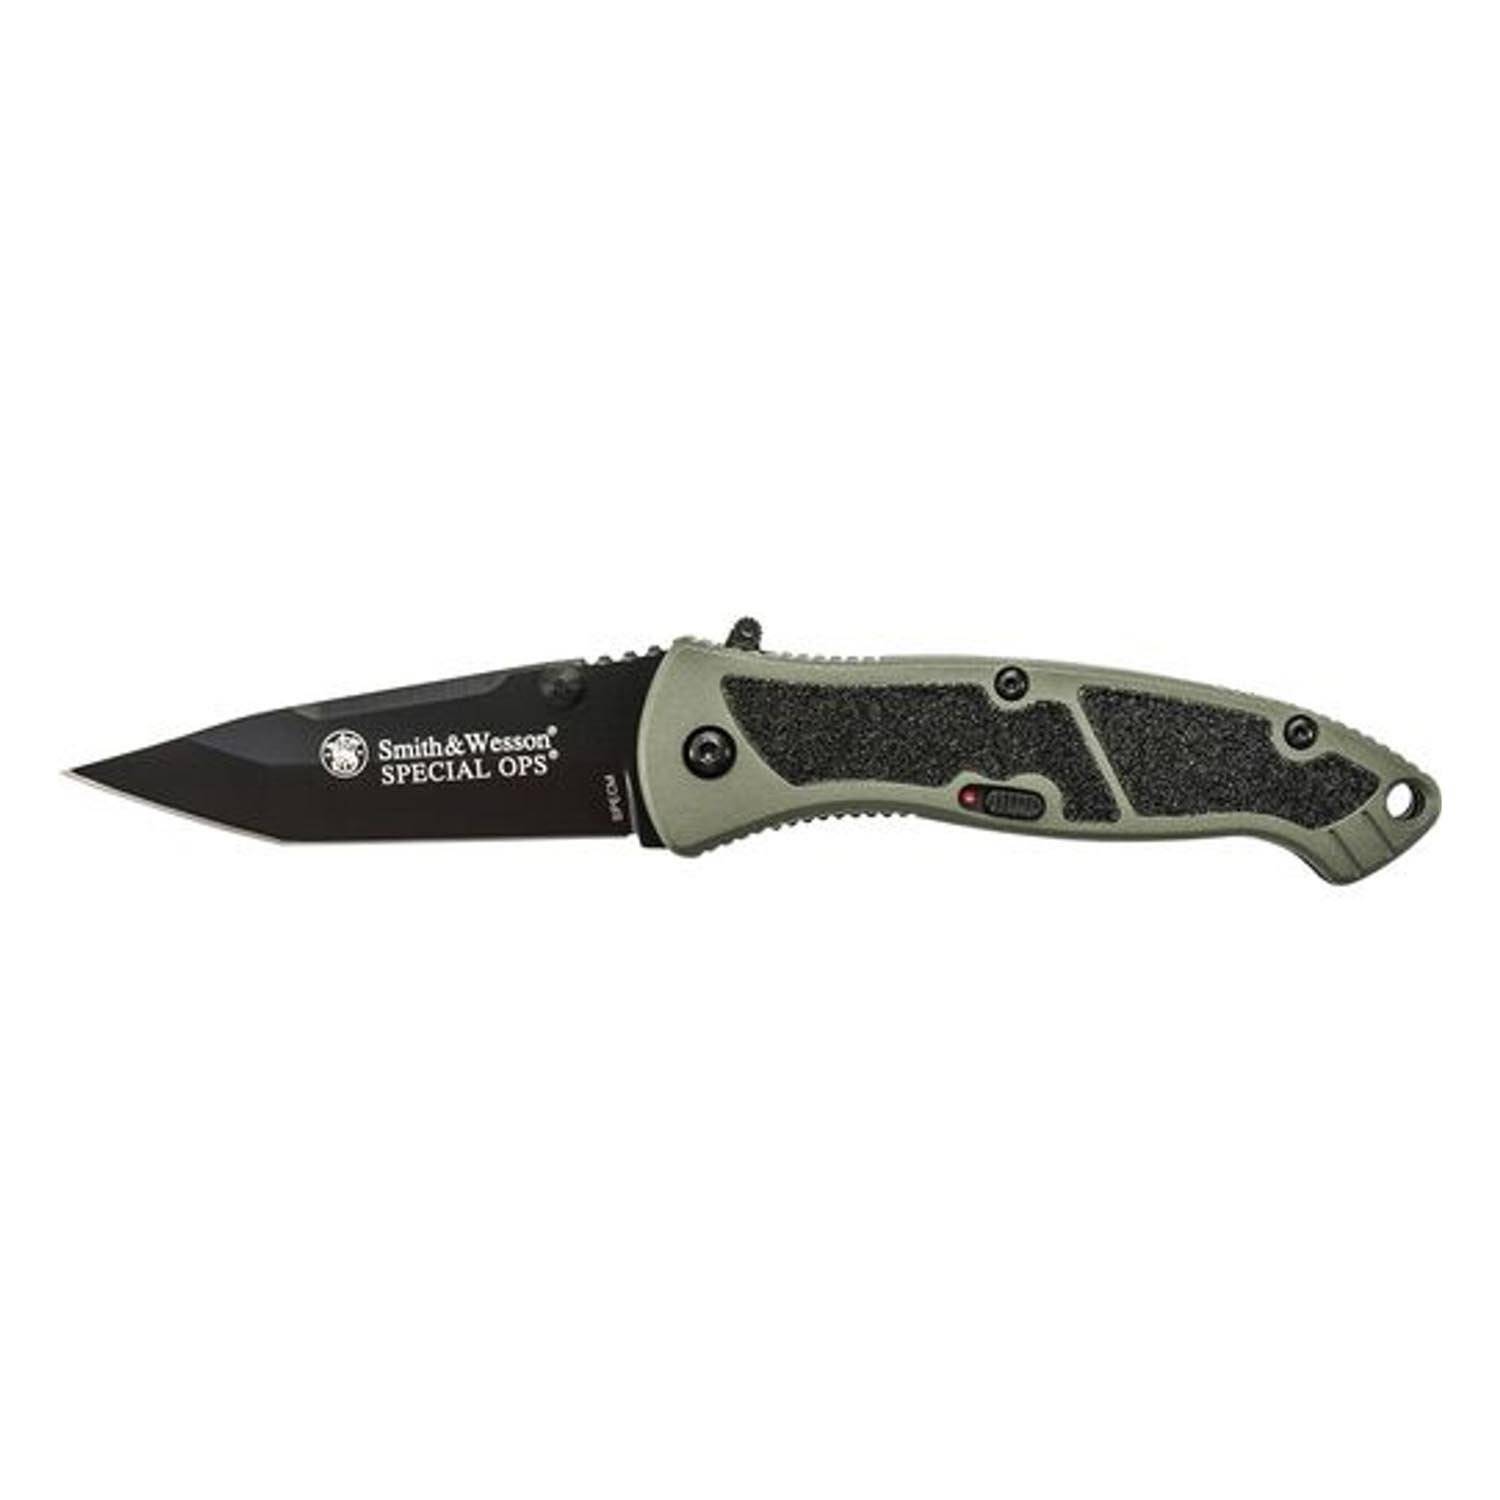 Smith & Wesson Special Ops M.A.G.I.C. Tanto Folding Knife